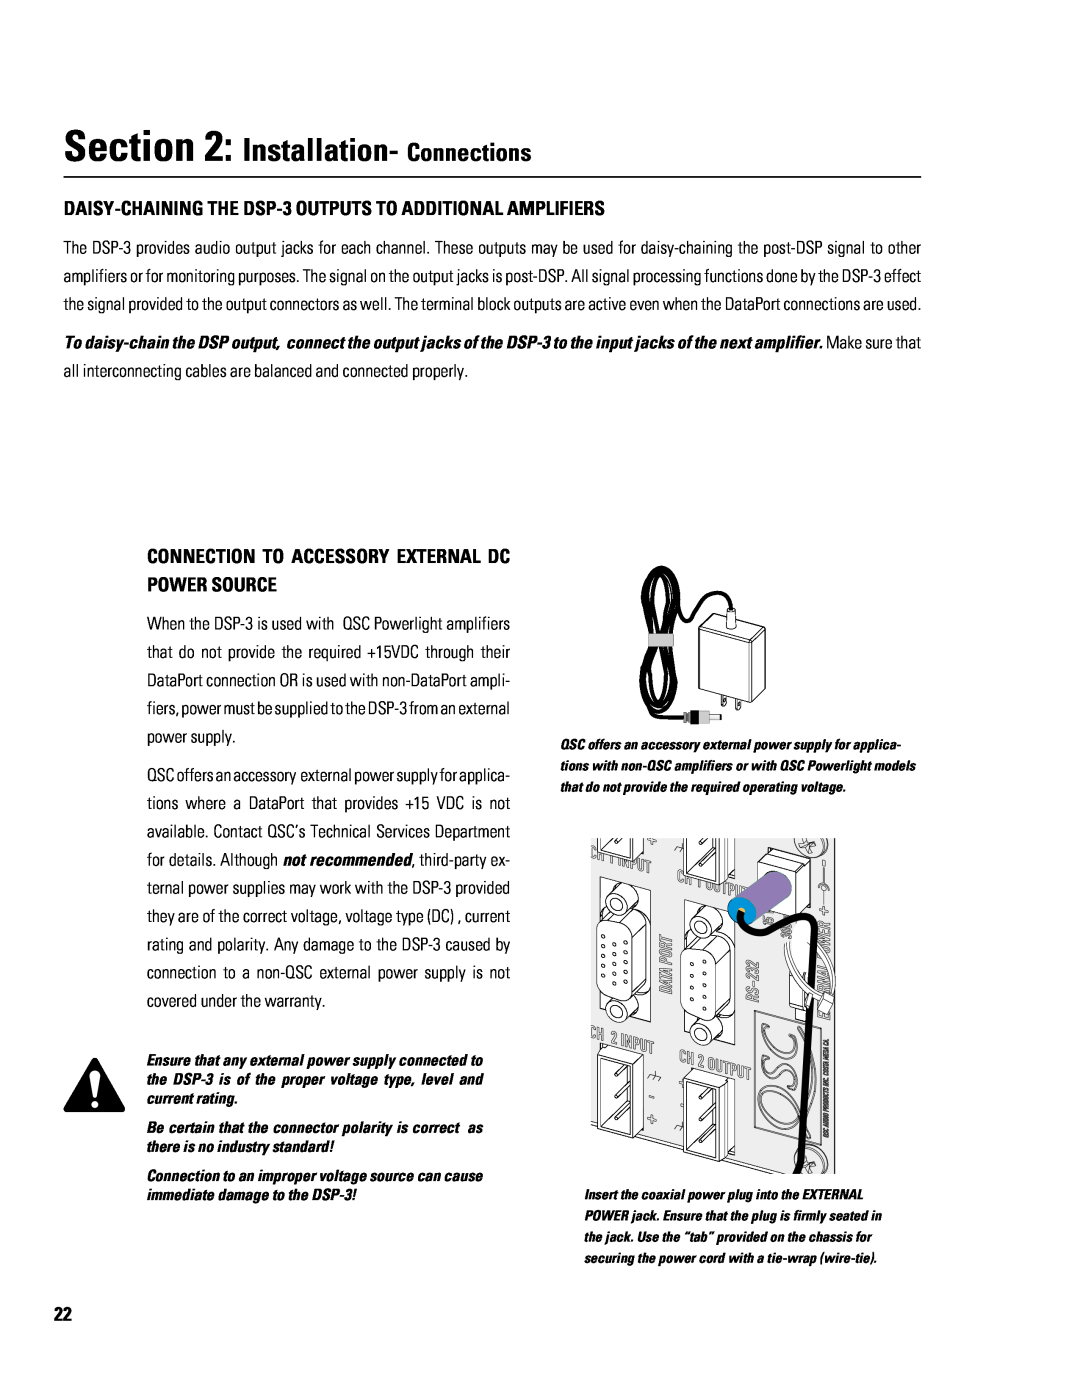 QSC Audio manual Installation- Connections, DAISY-CHAINING THE DSP-3 OUTPUTS TO ADDITIONAL AMPLIFIERS, Power Source 